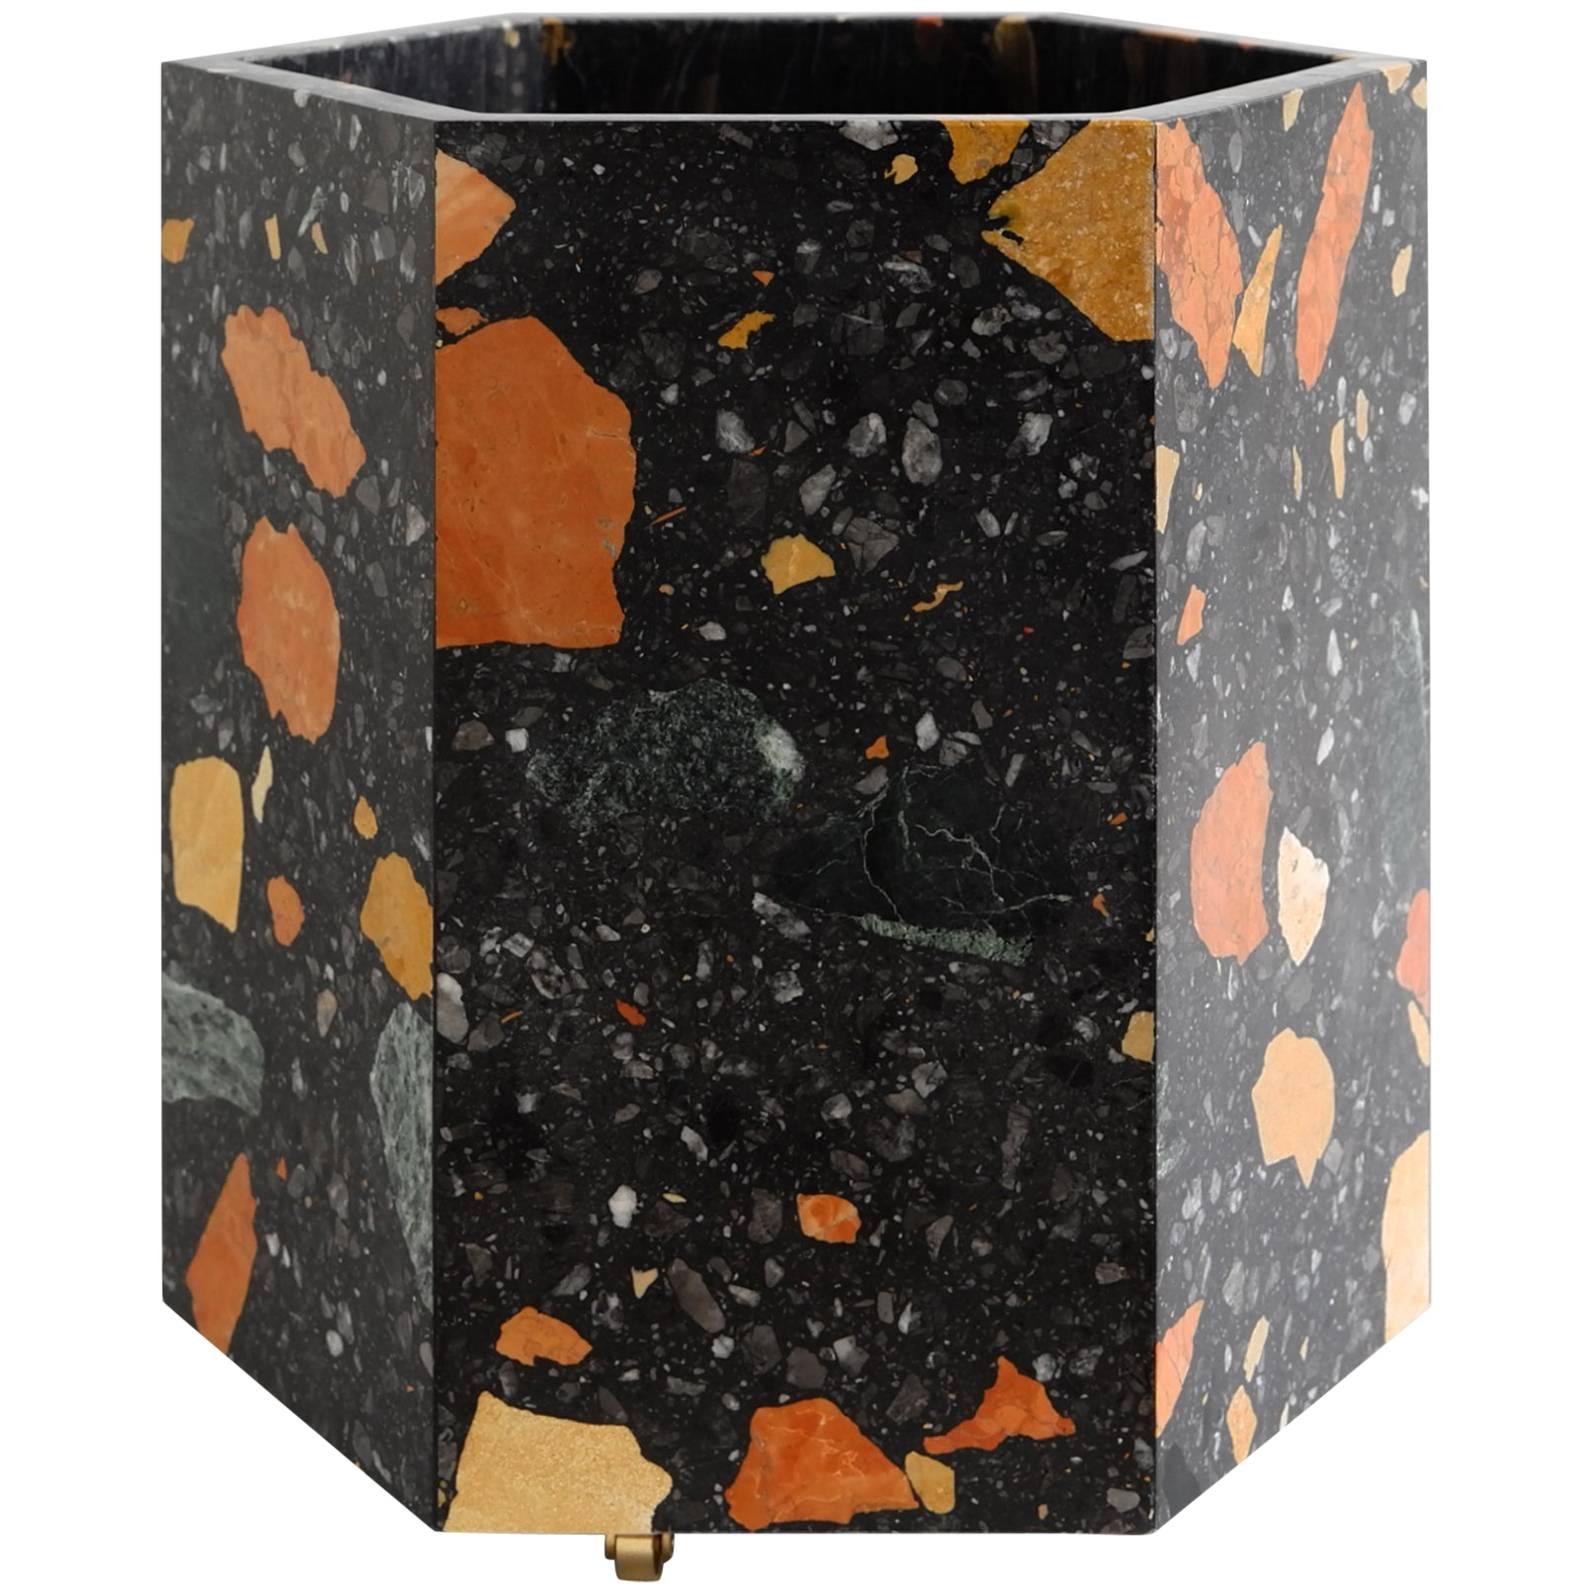 Contemporary Hexagonal Black Marmoreal Stone Planter by Fort Standard, in Stock